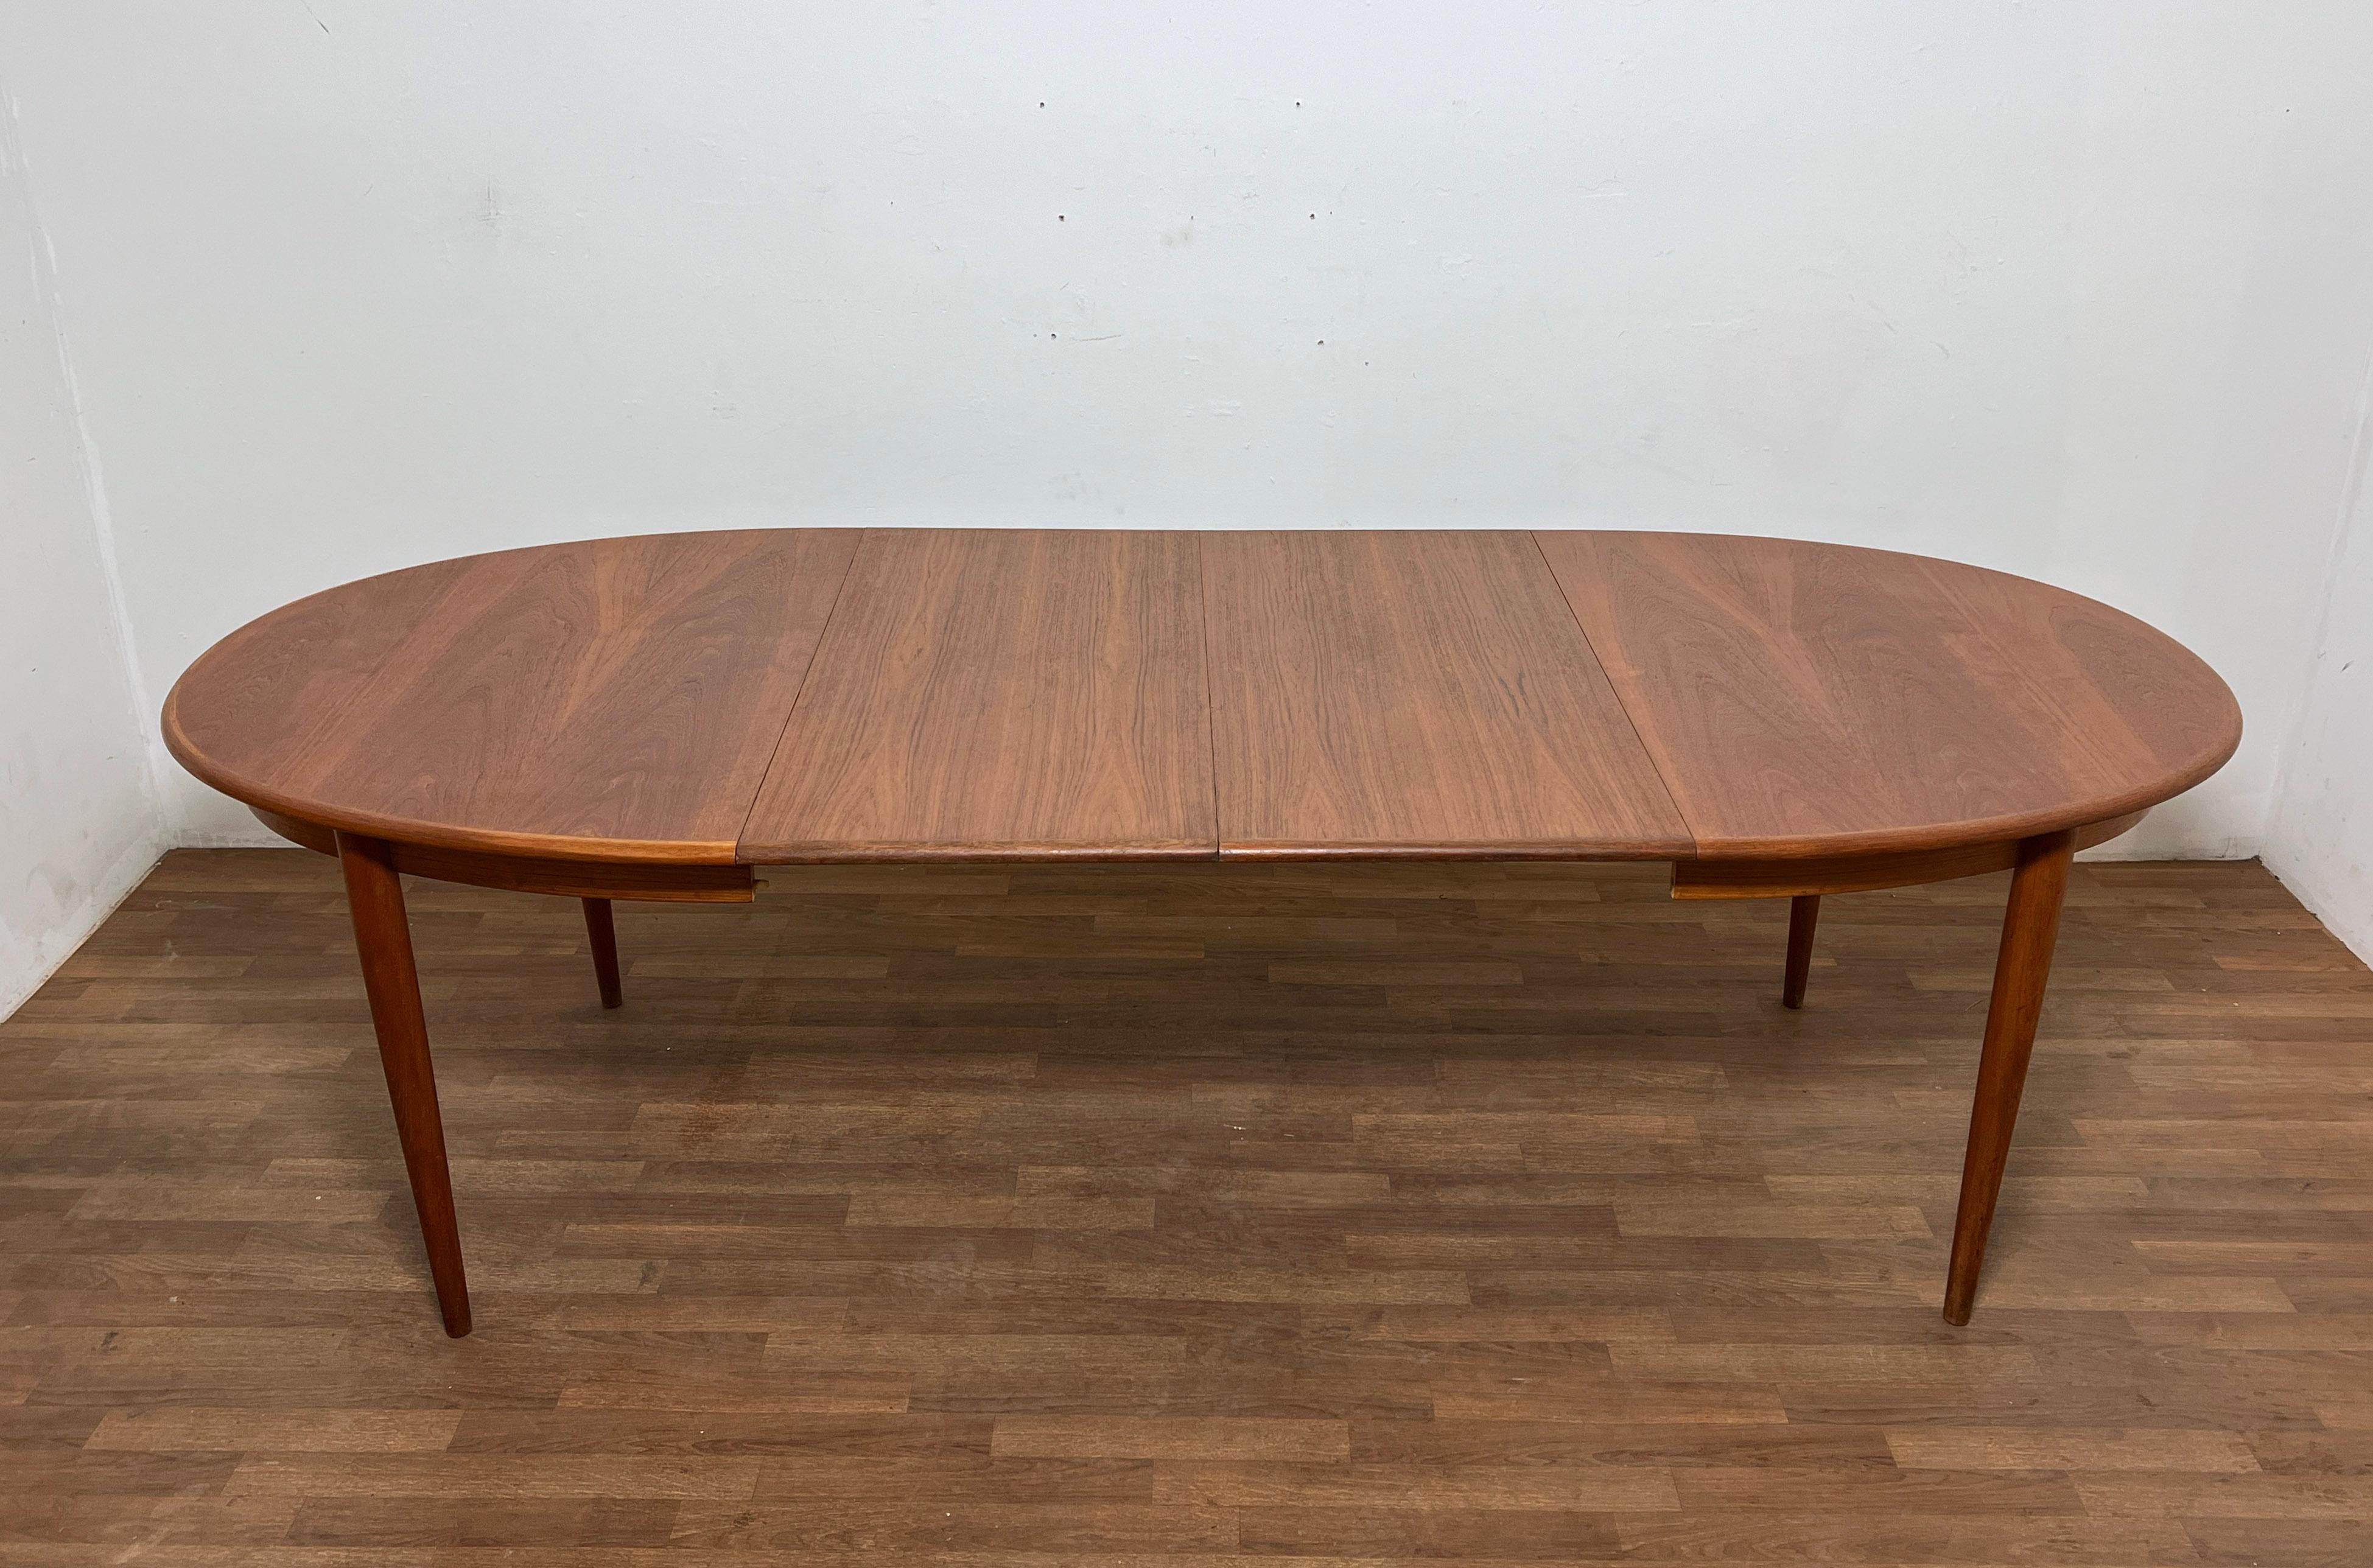 Mid-20th Century Danish Teak Oval Dining Table With Two Leaves by Gudme, Circa 1960s For Sale